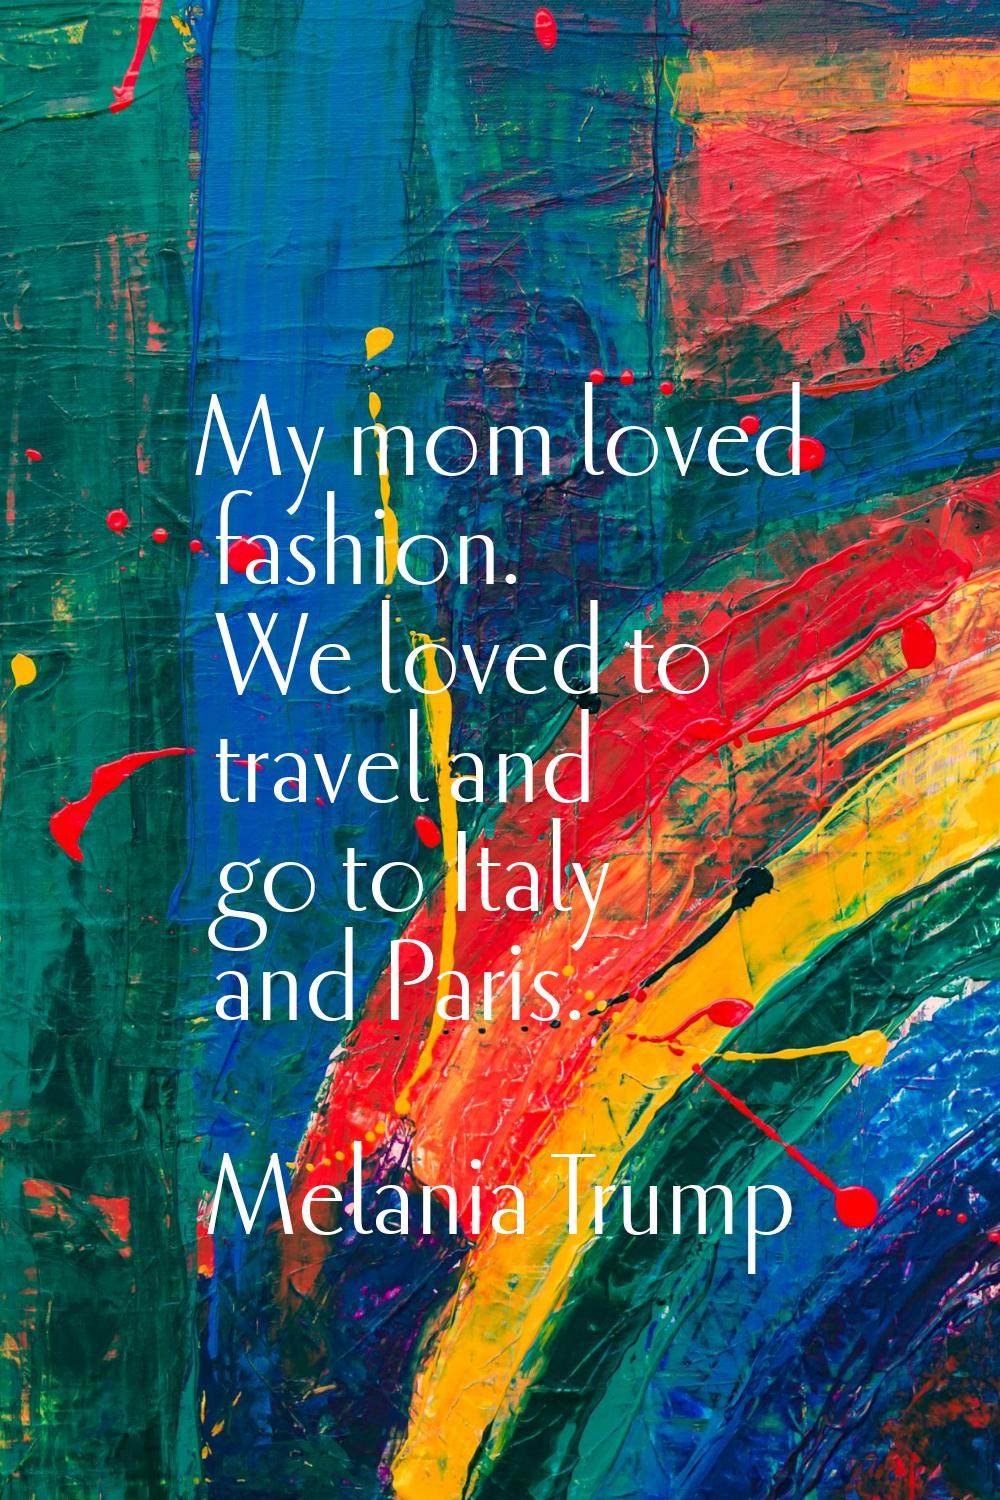 My mom loved fashion. We loved to travel and go to Italy and Paris.